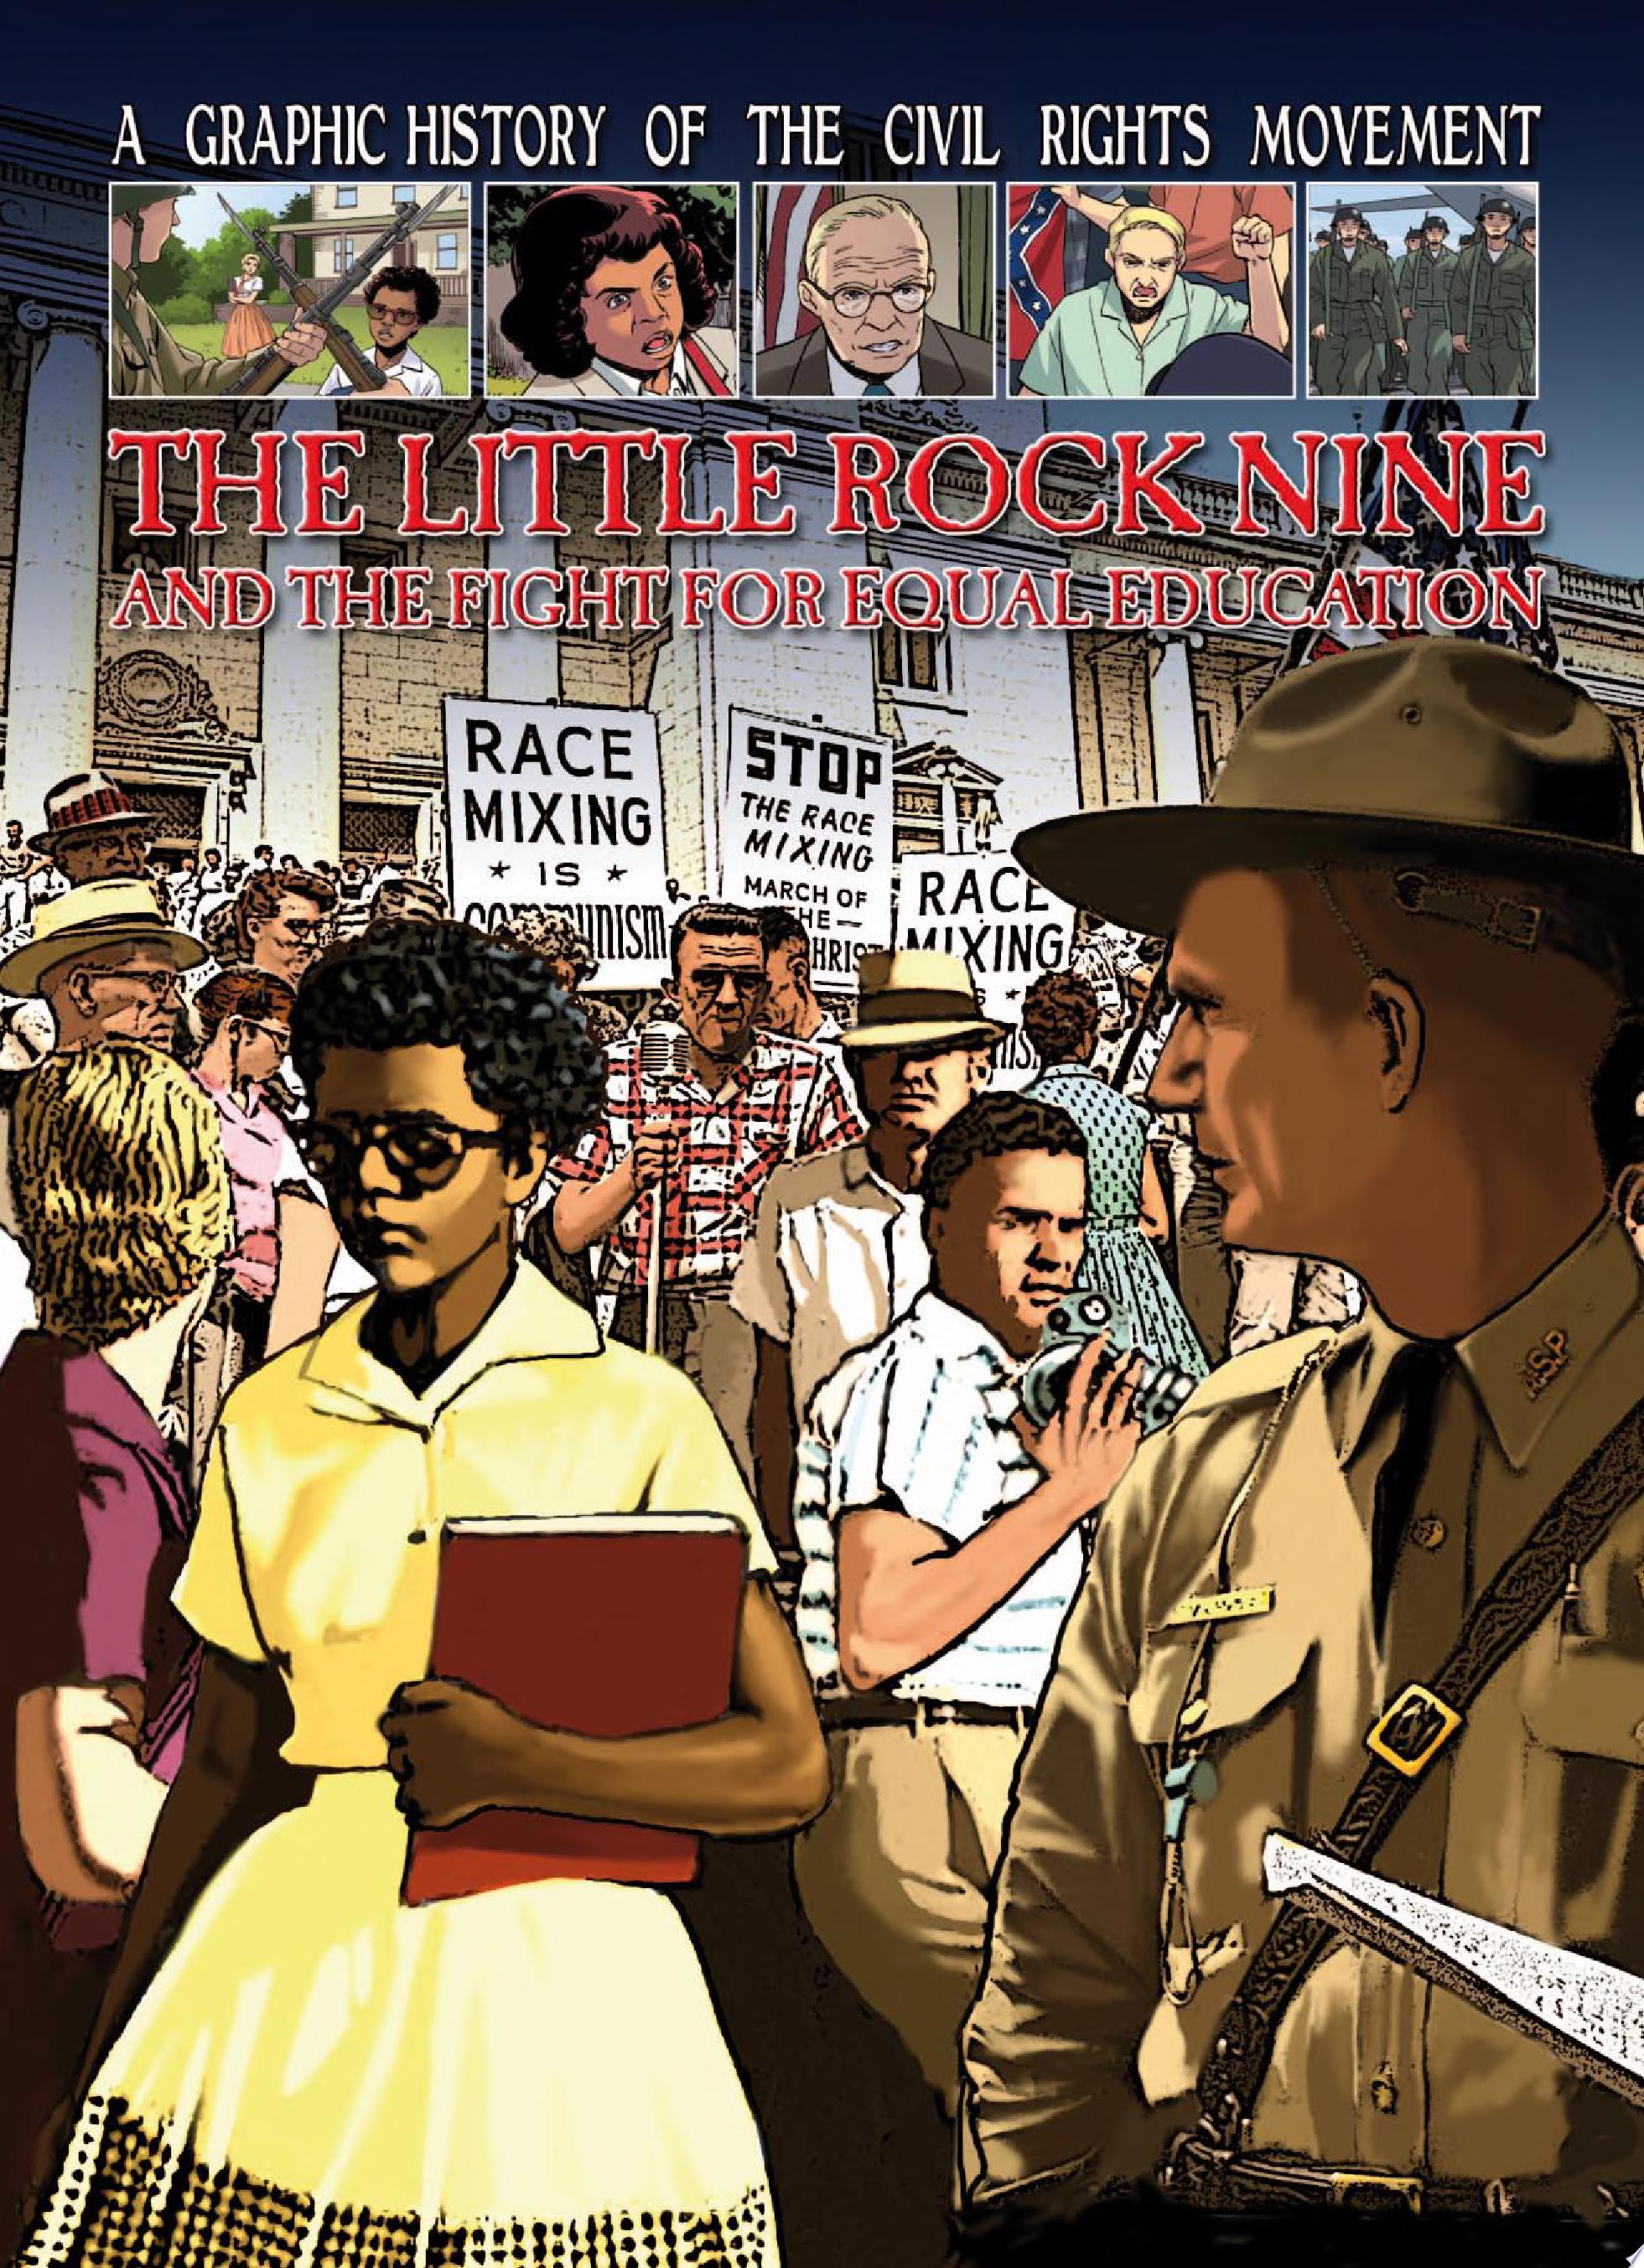 Image for "The Little Rock Nine and the Fight for Equal Education"